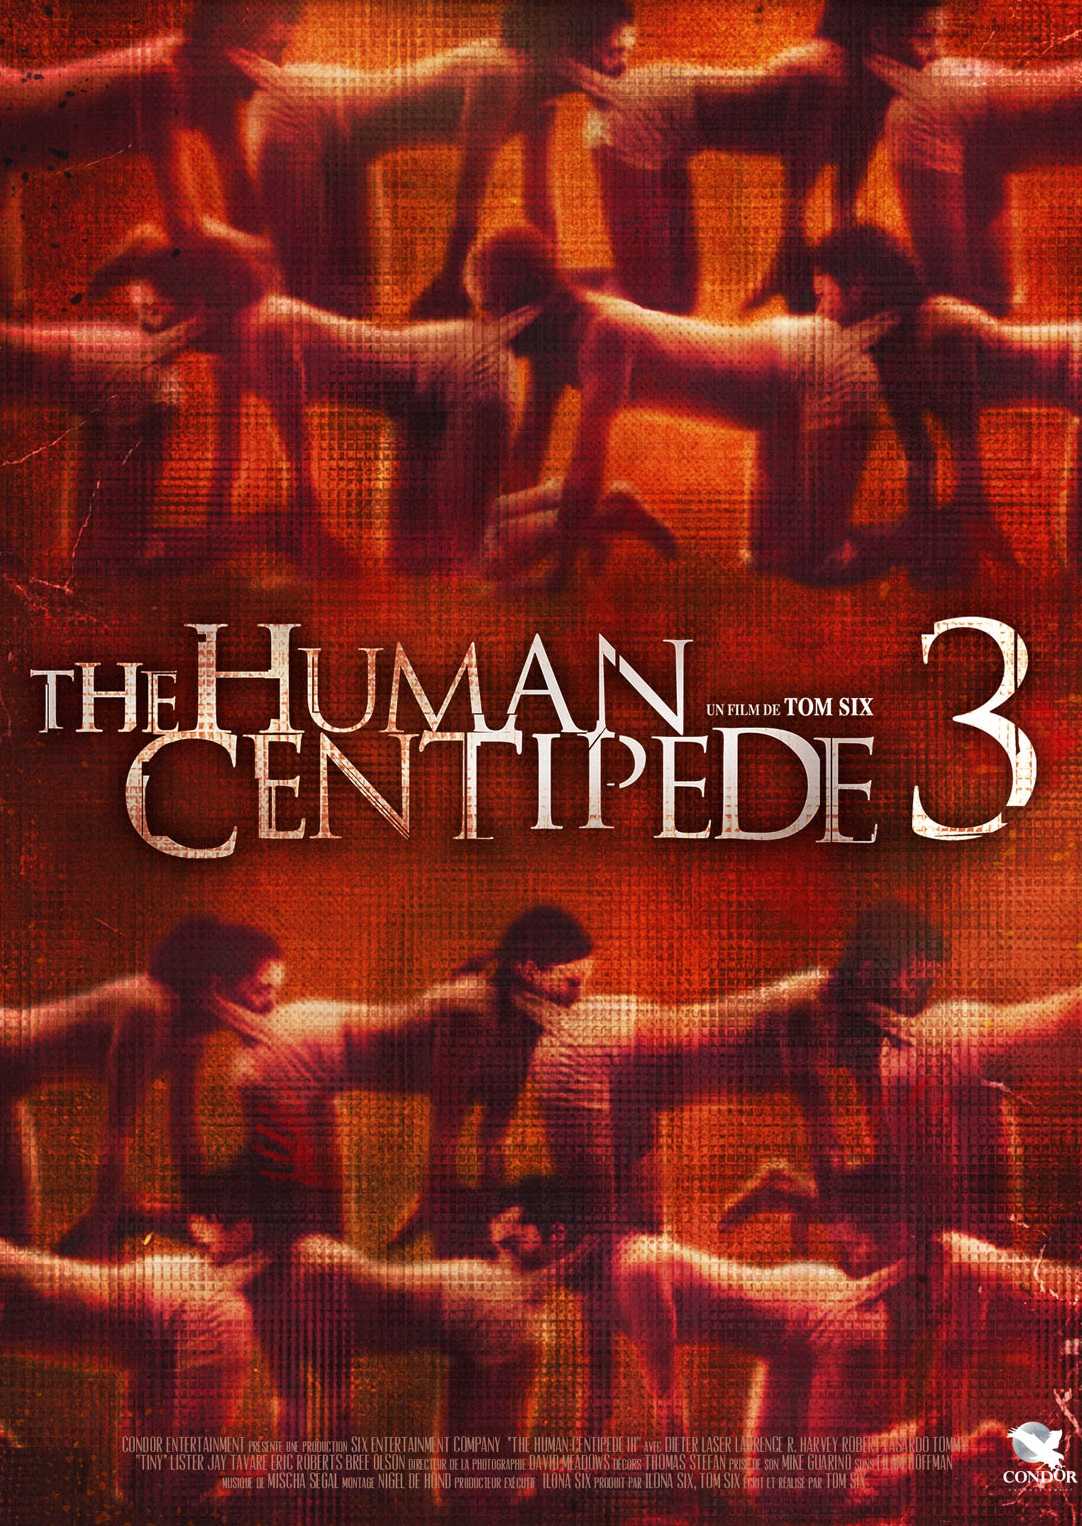 The Human Centipede 3 – Final Sequence [Sub-ITA] in streaming